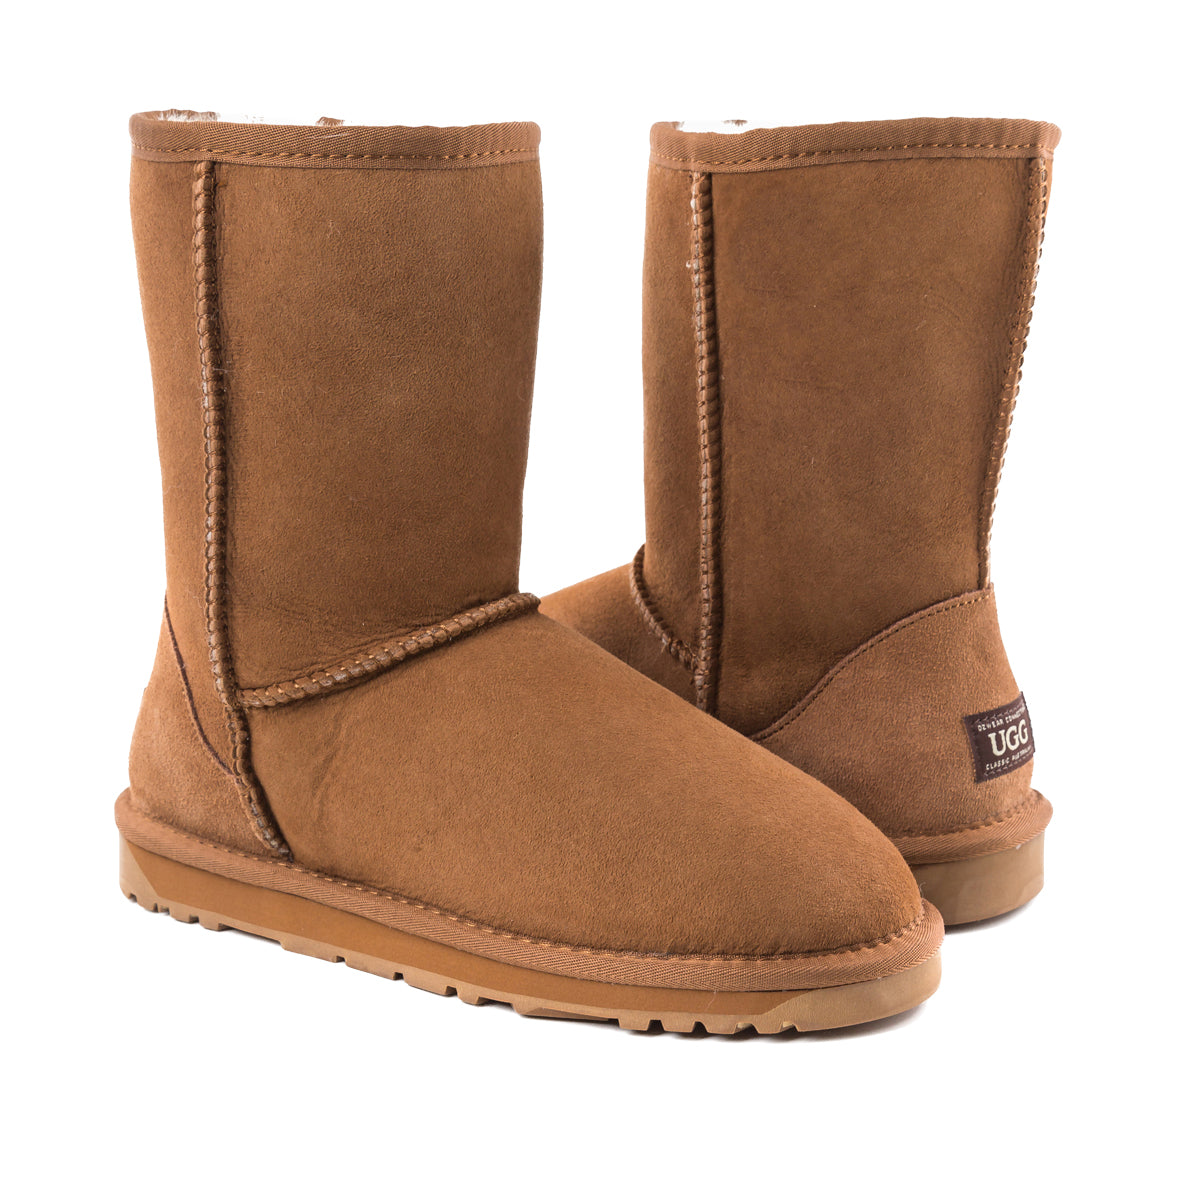 Buy Cheap UGG LV shoes for UGG Short Boots #9999926321 from